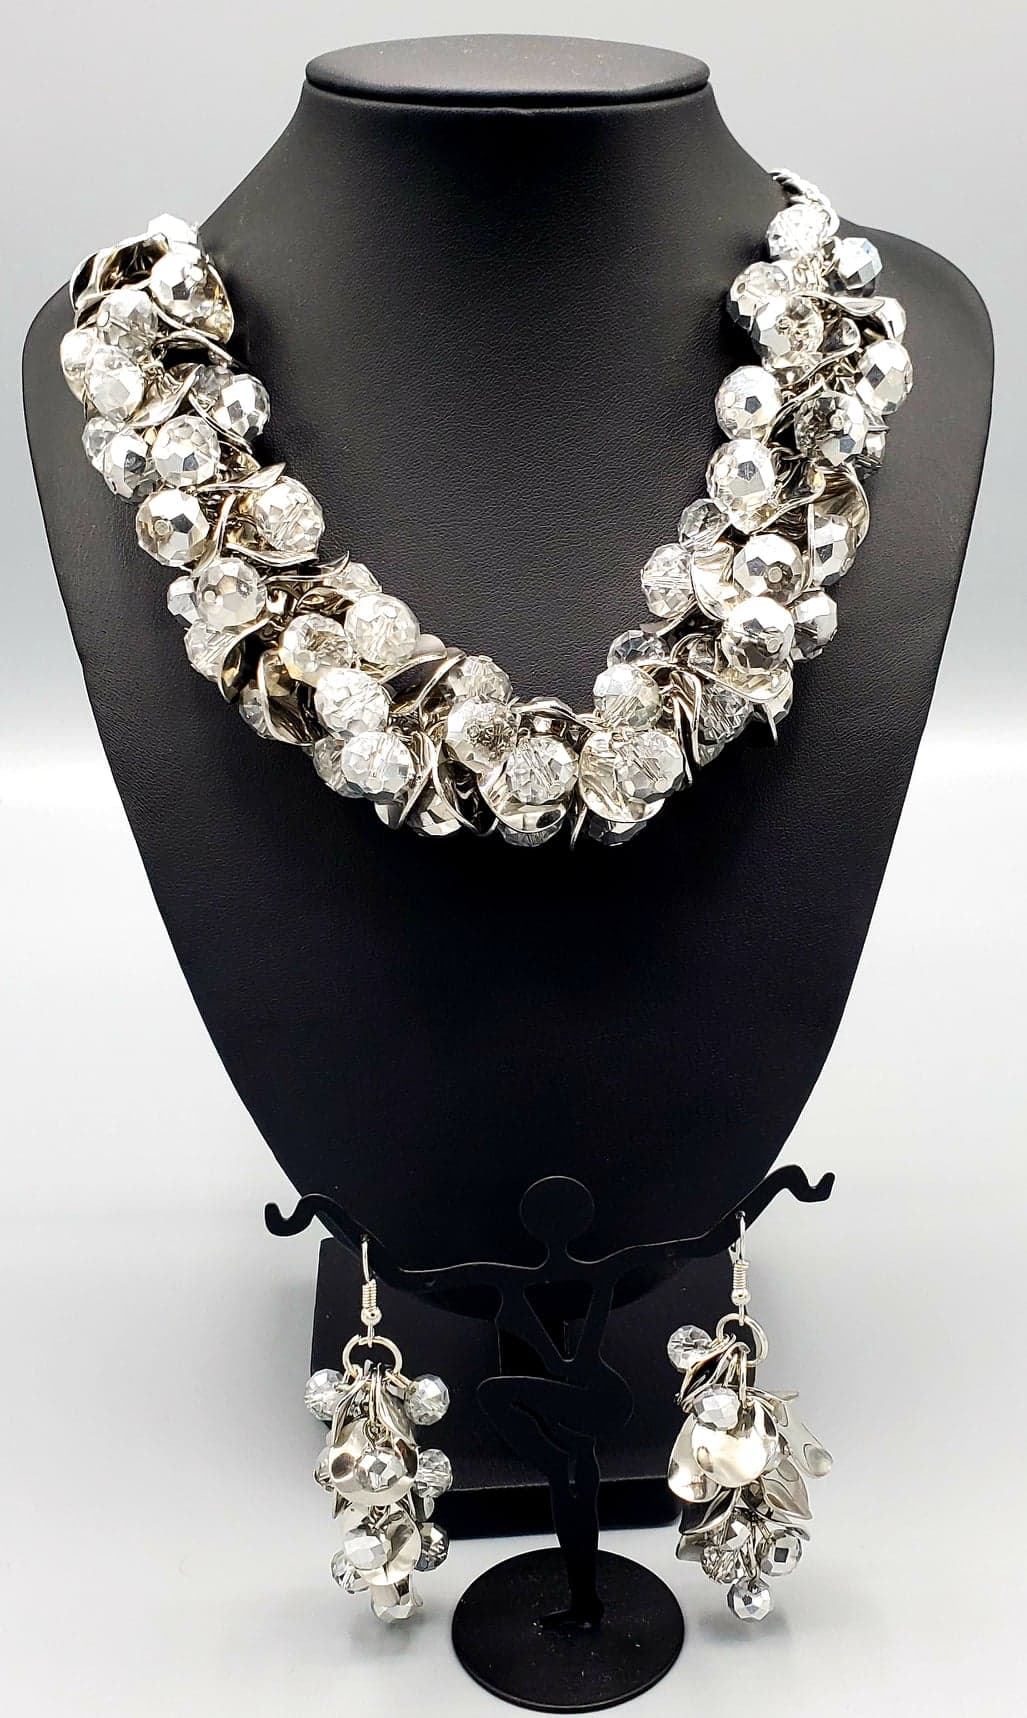 The Haydee 2020 Signature Zi Collection Necklace and Earrings